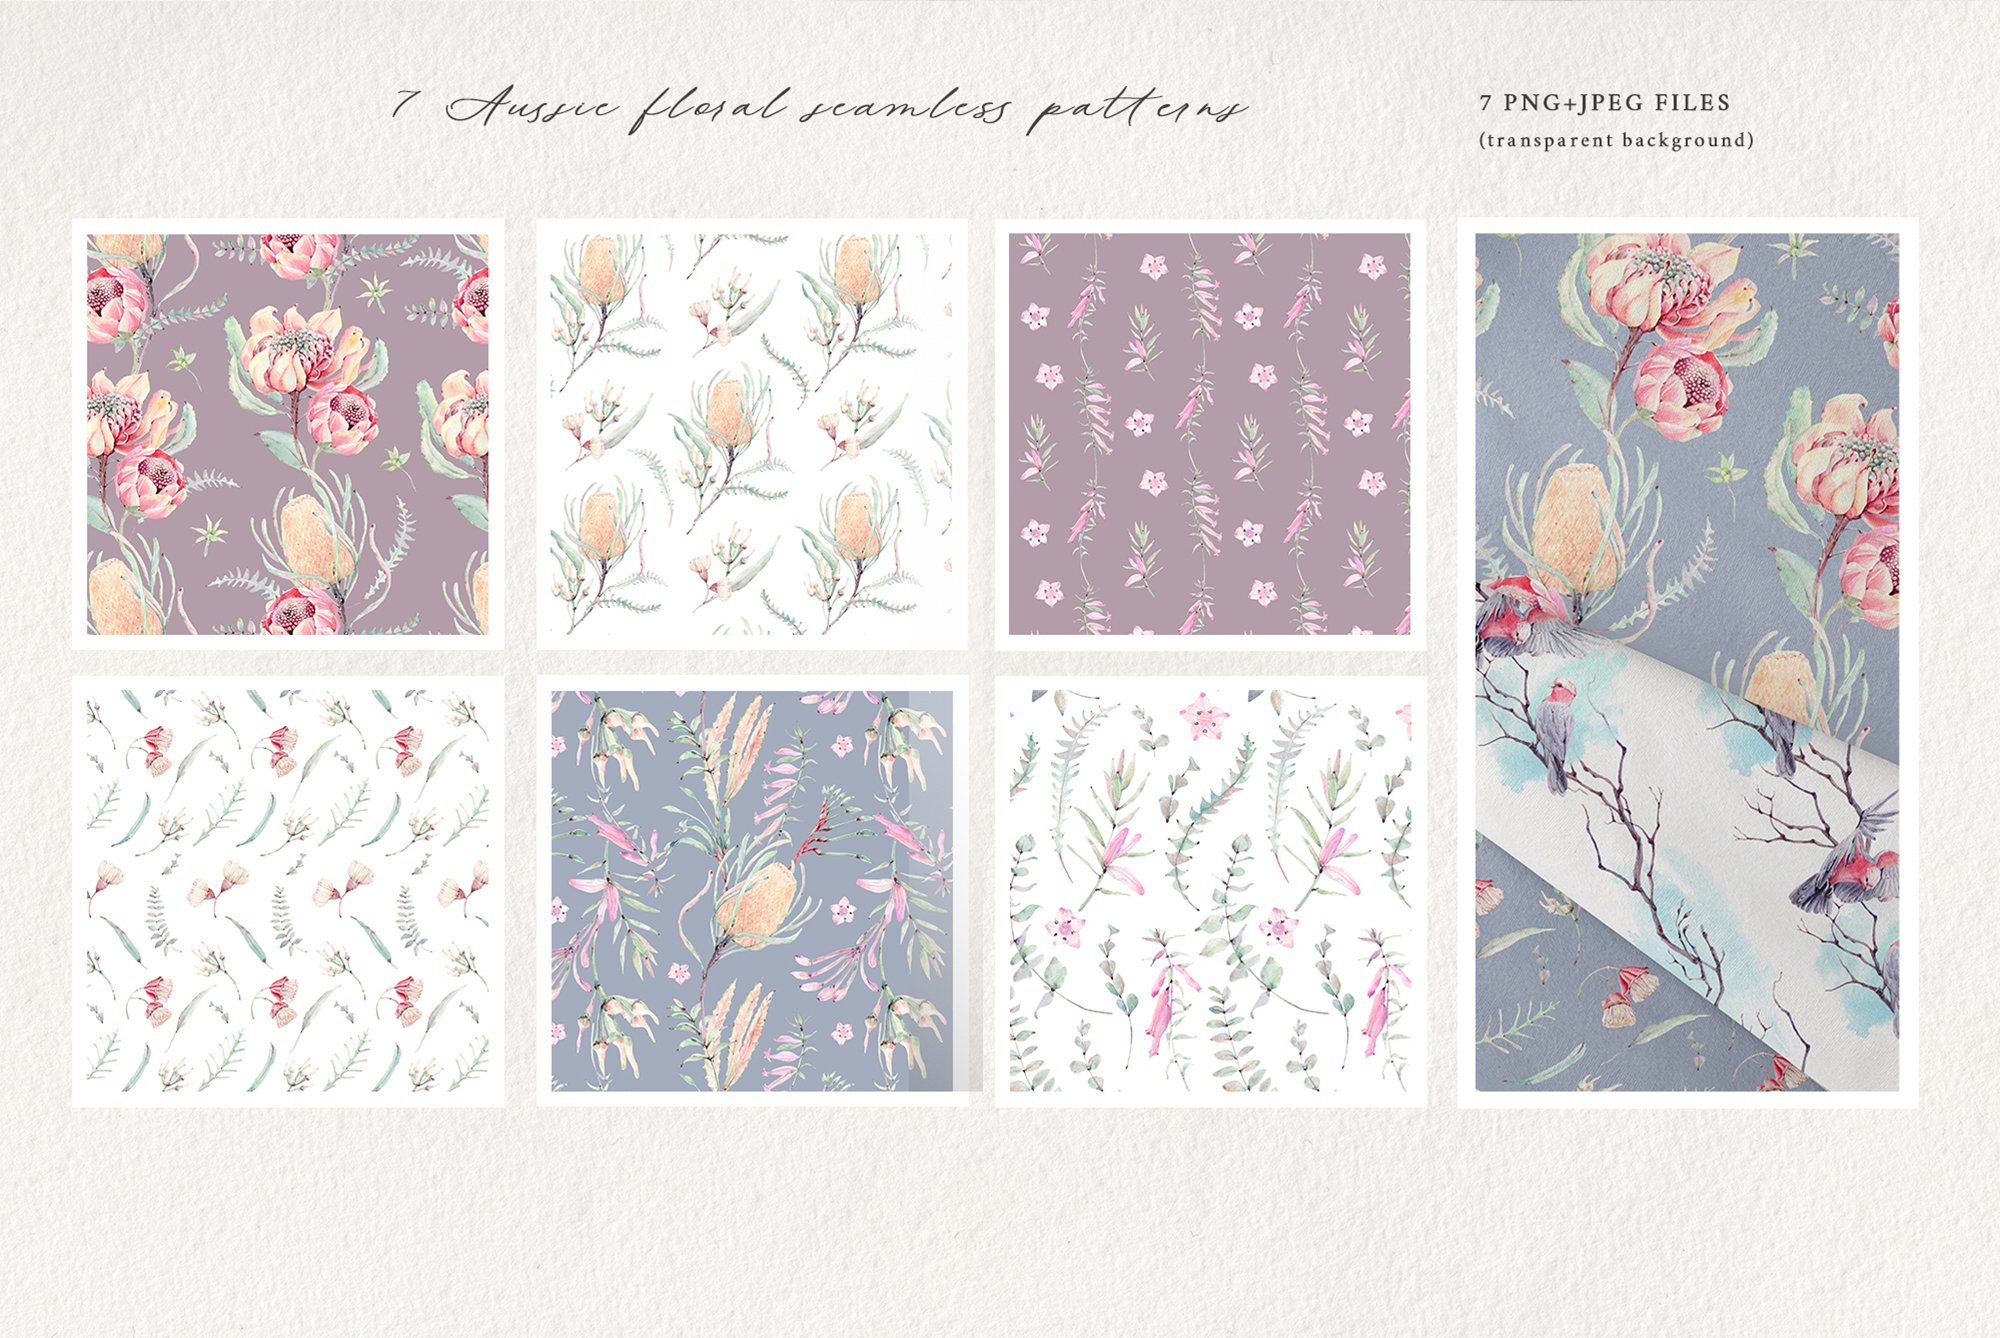 Some patterns with different prints for your illustrations.